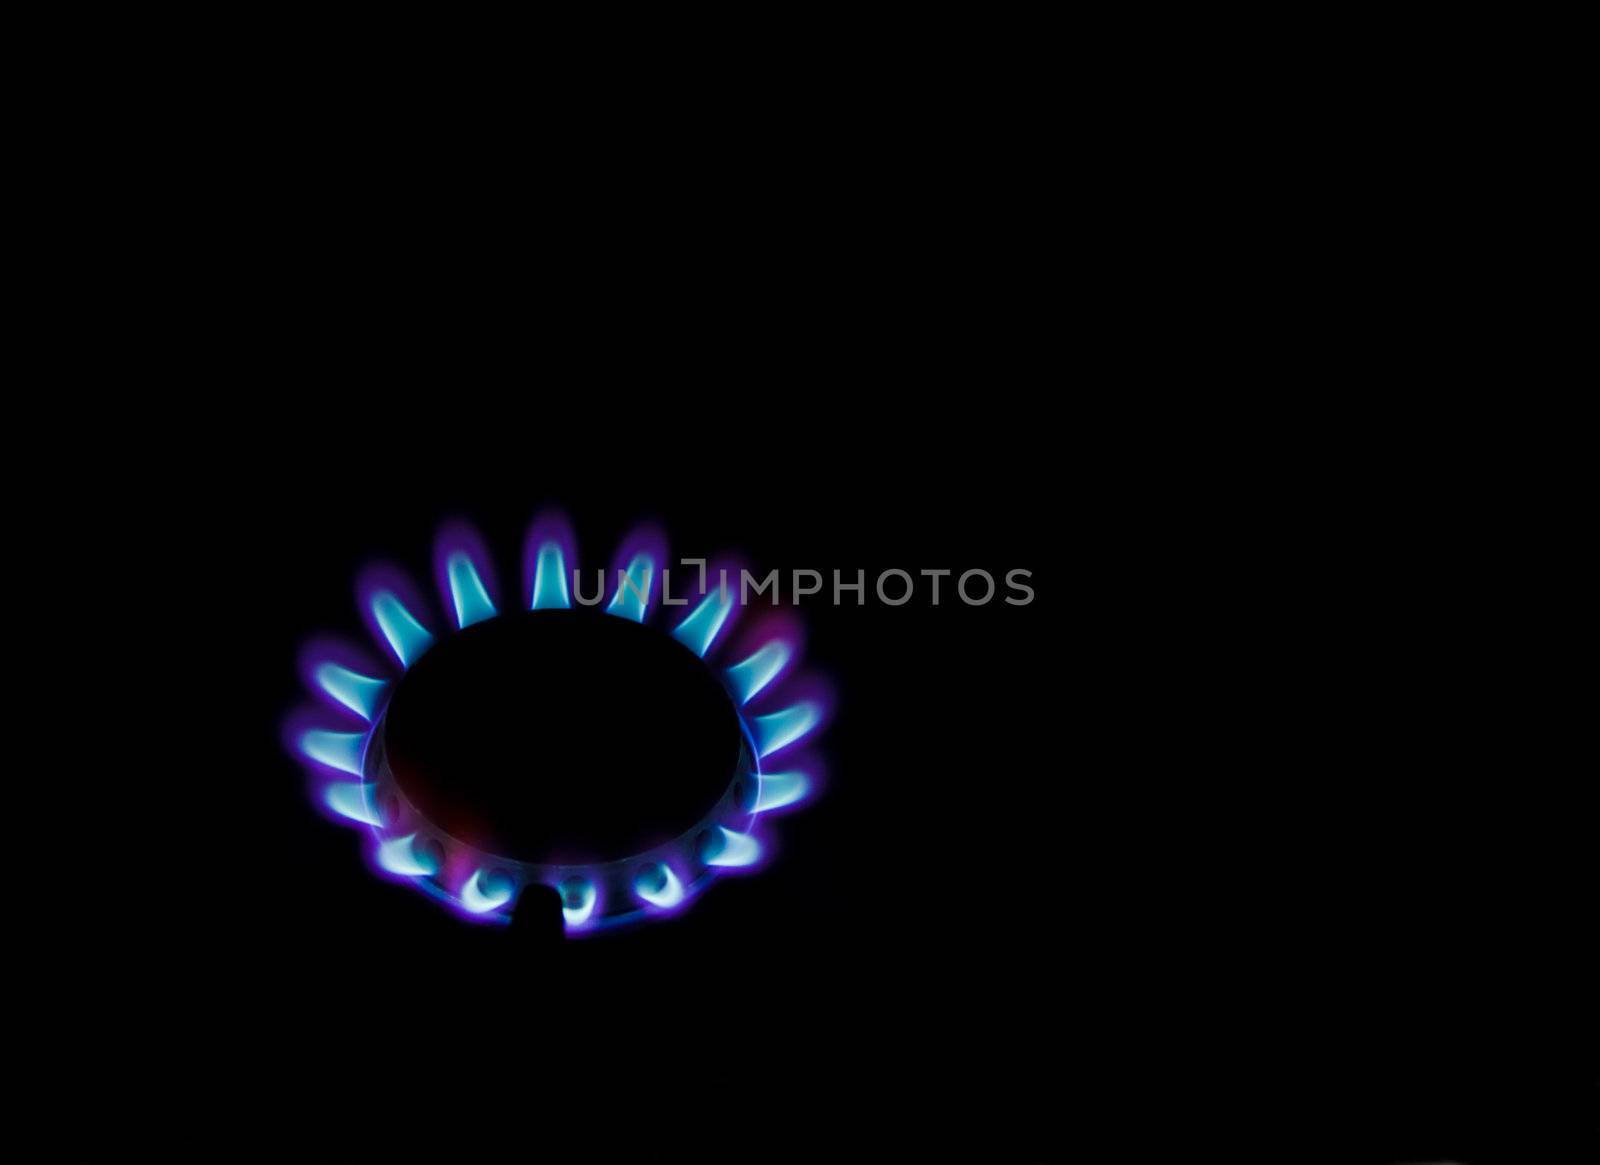 Burning ring flames of gas stove on black background.